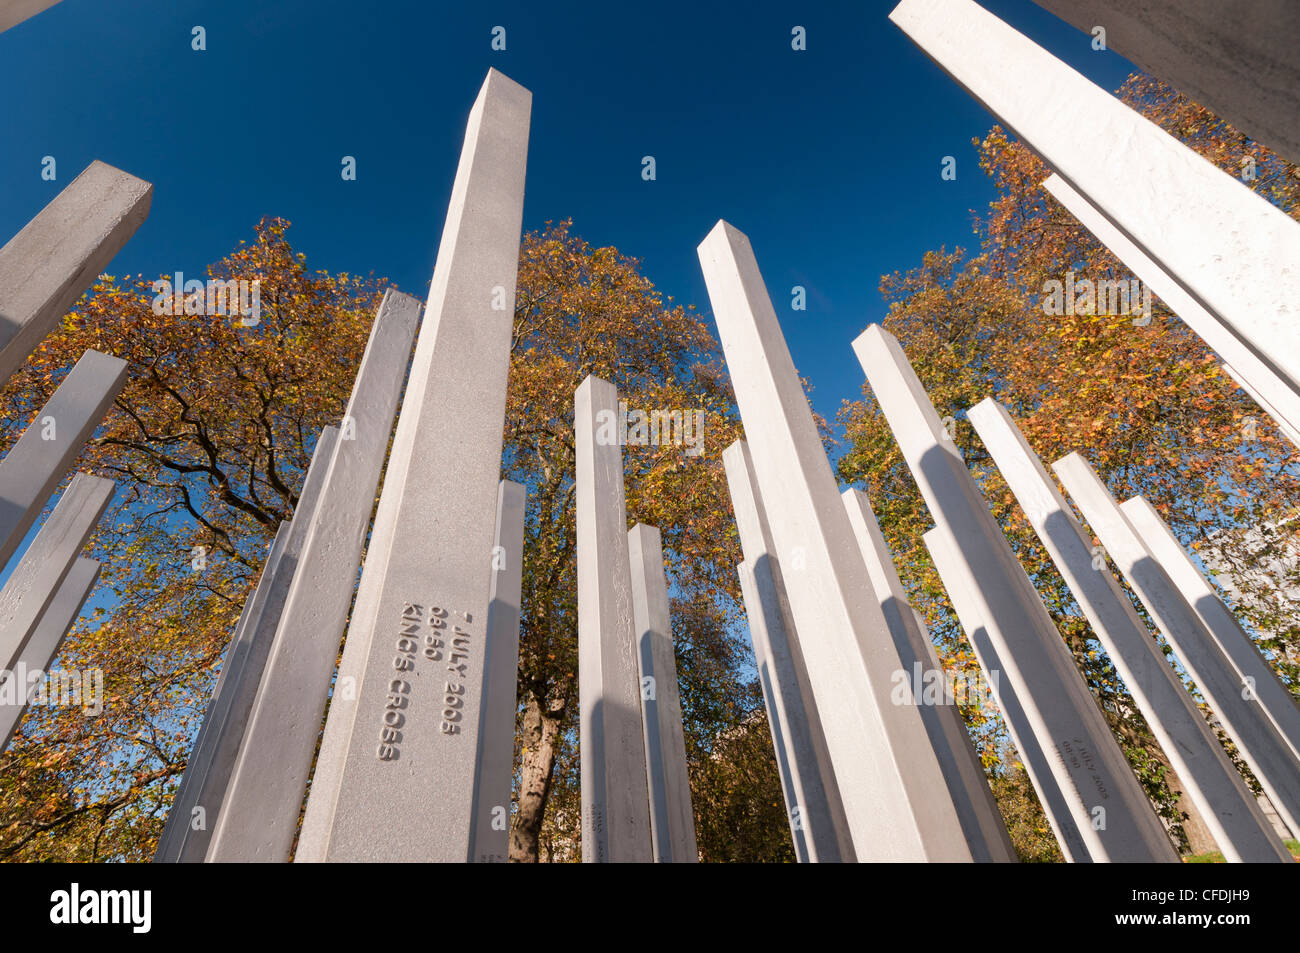 The 7th July Memorial to victims of the 2005 bombings, Hyde Park, London, England, United Kingdom, Europe Stock Photo